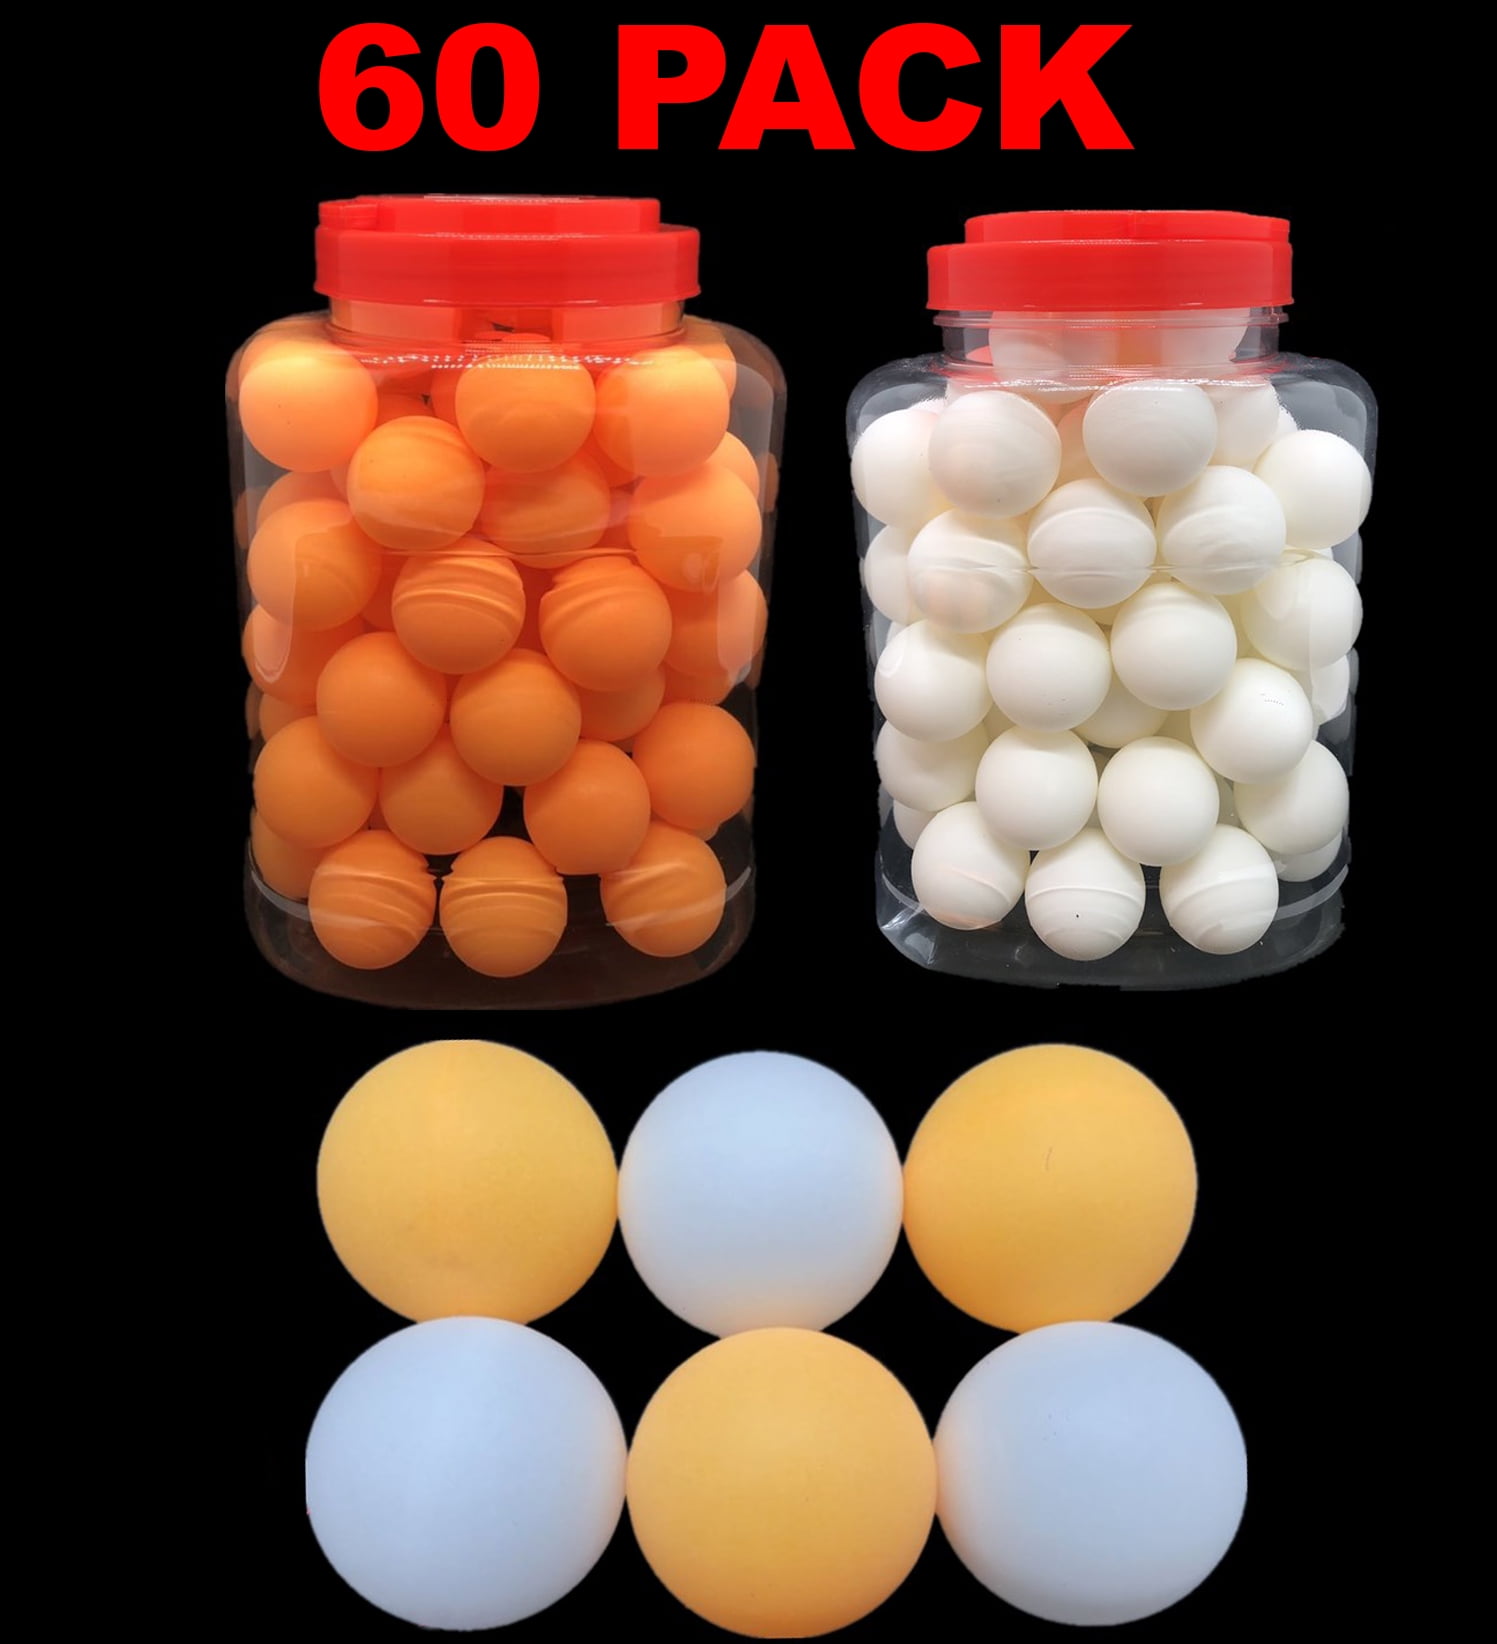 50 Beer Ping Pong Balls Glow In The Dark Pingpong Ball White Bulk Lot For Games 